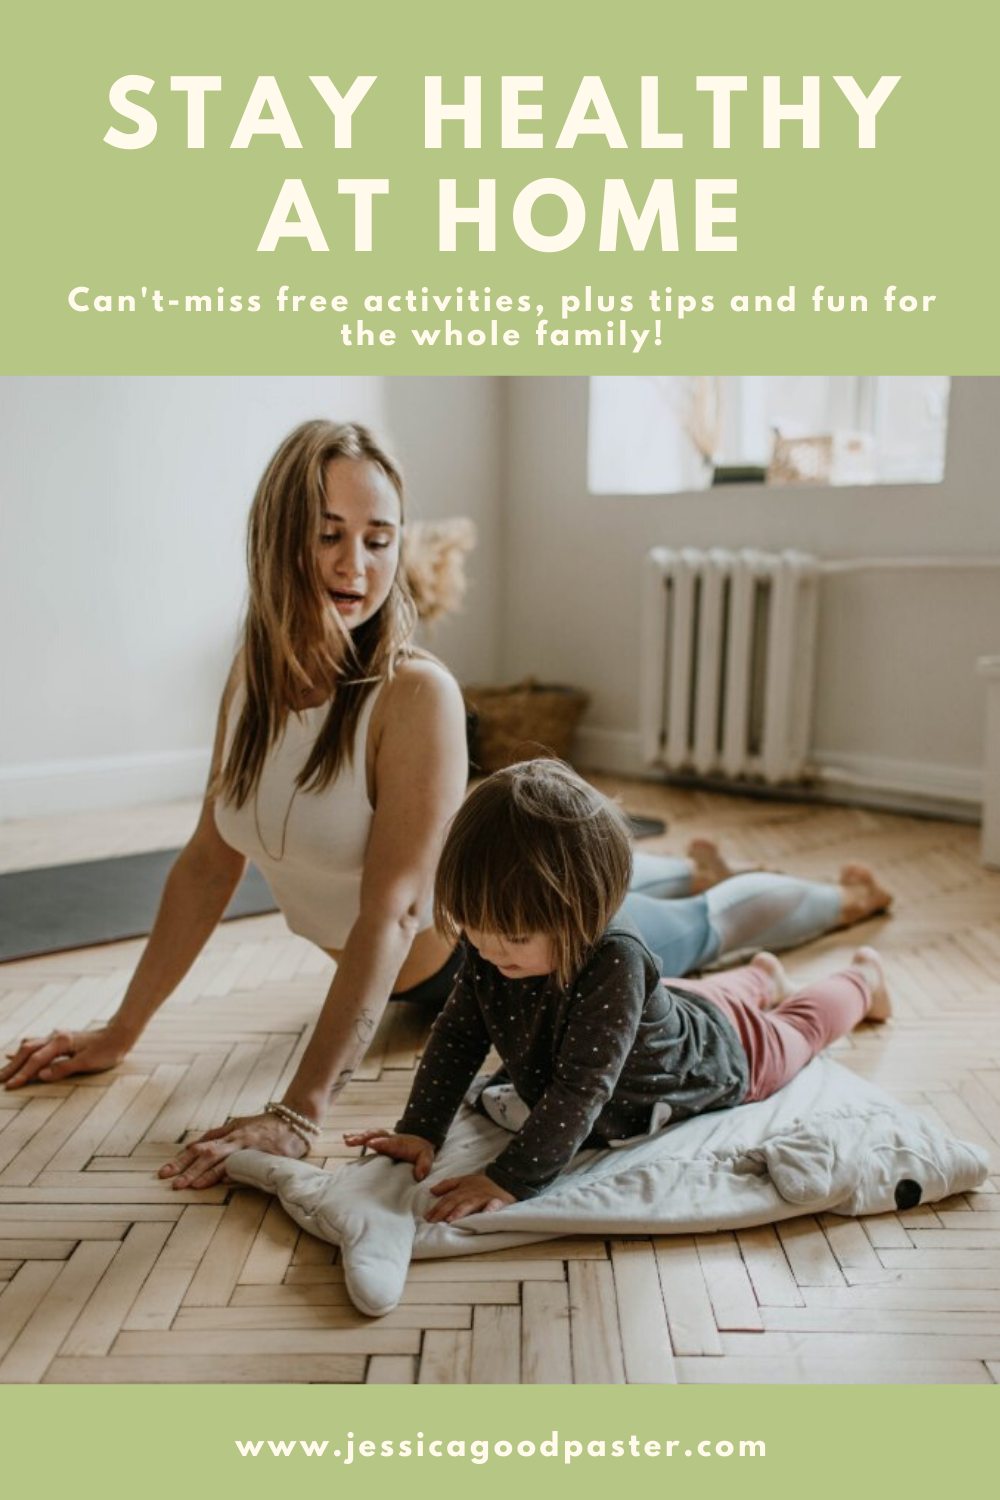 Tips, tricks, resources, and free educational activities for when you're stuck at home! This list includes ways to make life easier for the whole family. Find fun and games, supports for kids with special needs, tips for getting food and supplies delivered, physical and mental health activities, and free educational resources! #home #socialdistancing #parenting #homeschool #lifehacks #healthyathome #exercise